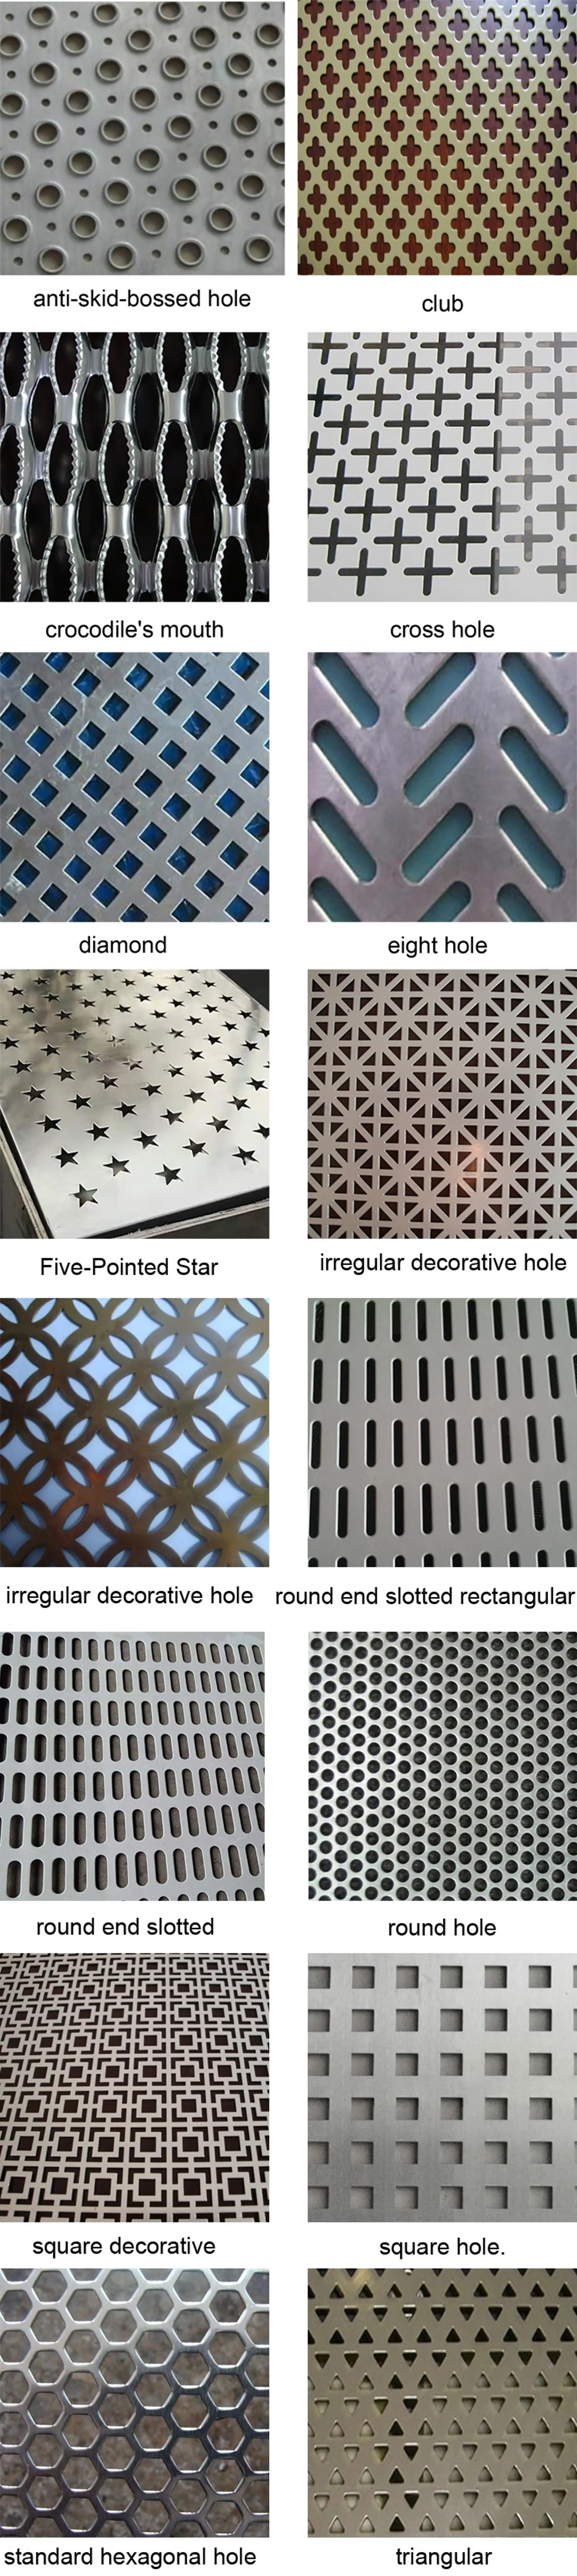 Stainless Steel Circle Perforated Metal Mesh Sheet For Screens Buy Perforated Stainless Steel Sheet Circle Perforated Metal Mesh Perforated Metal Sheet Product On Alibaba Com